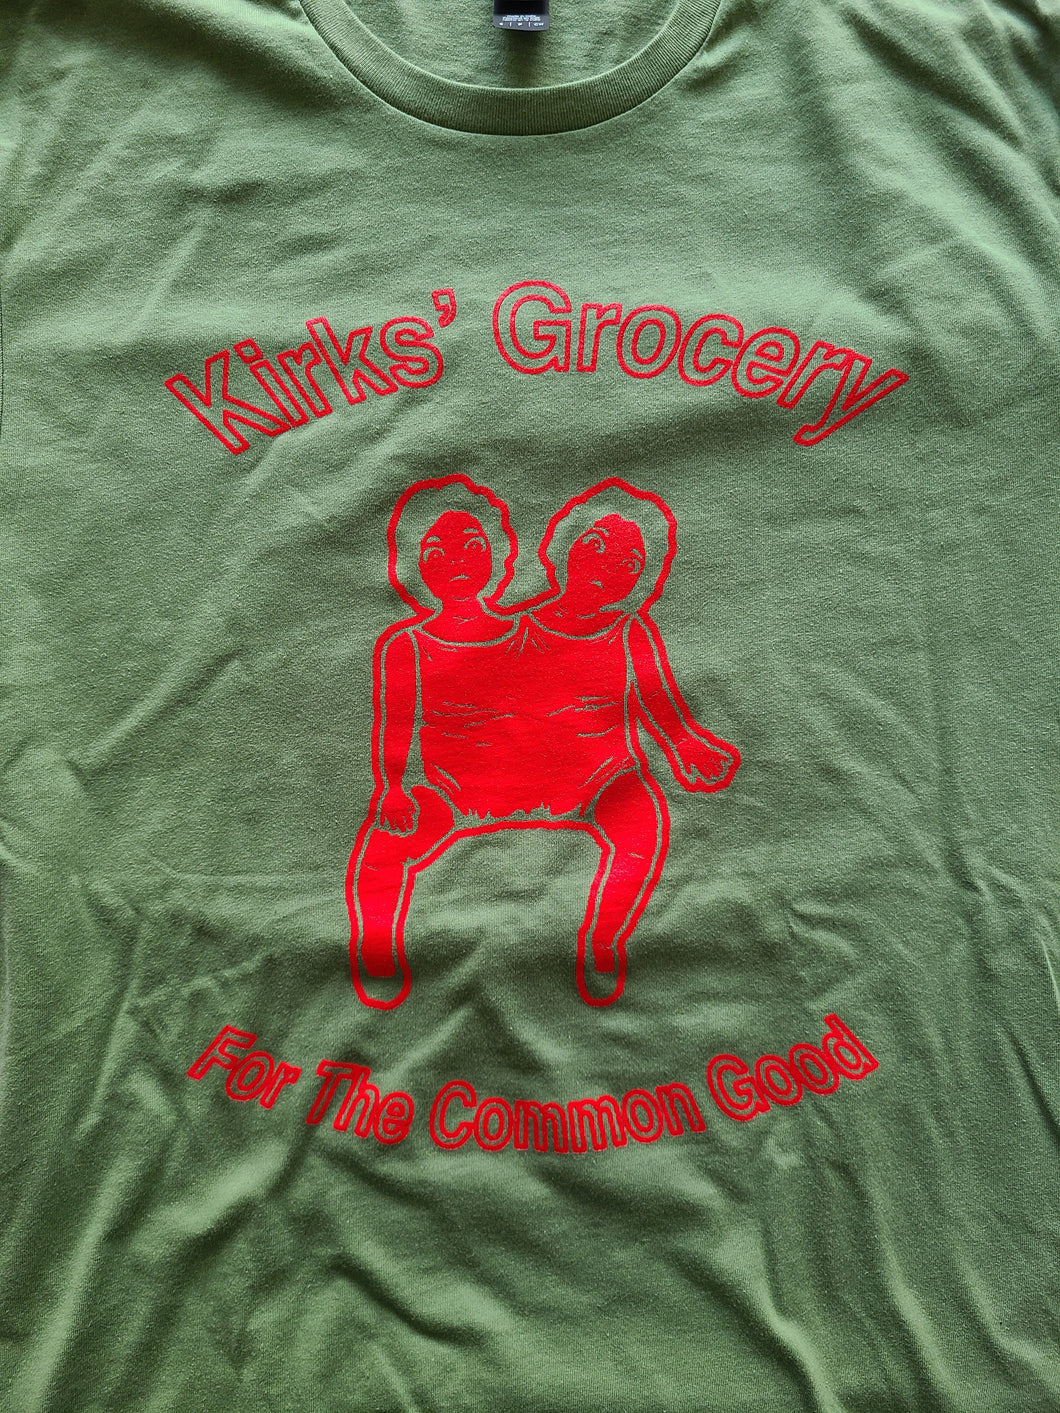 Kirks' Grocery Unisex T-Shirt | Two Headed Doll (Red on Green)